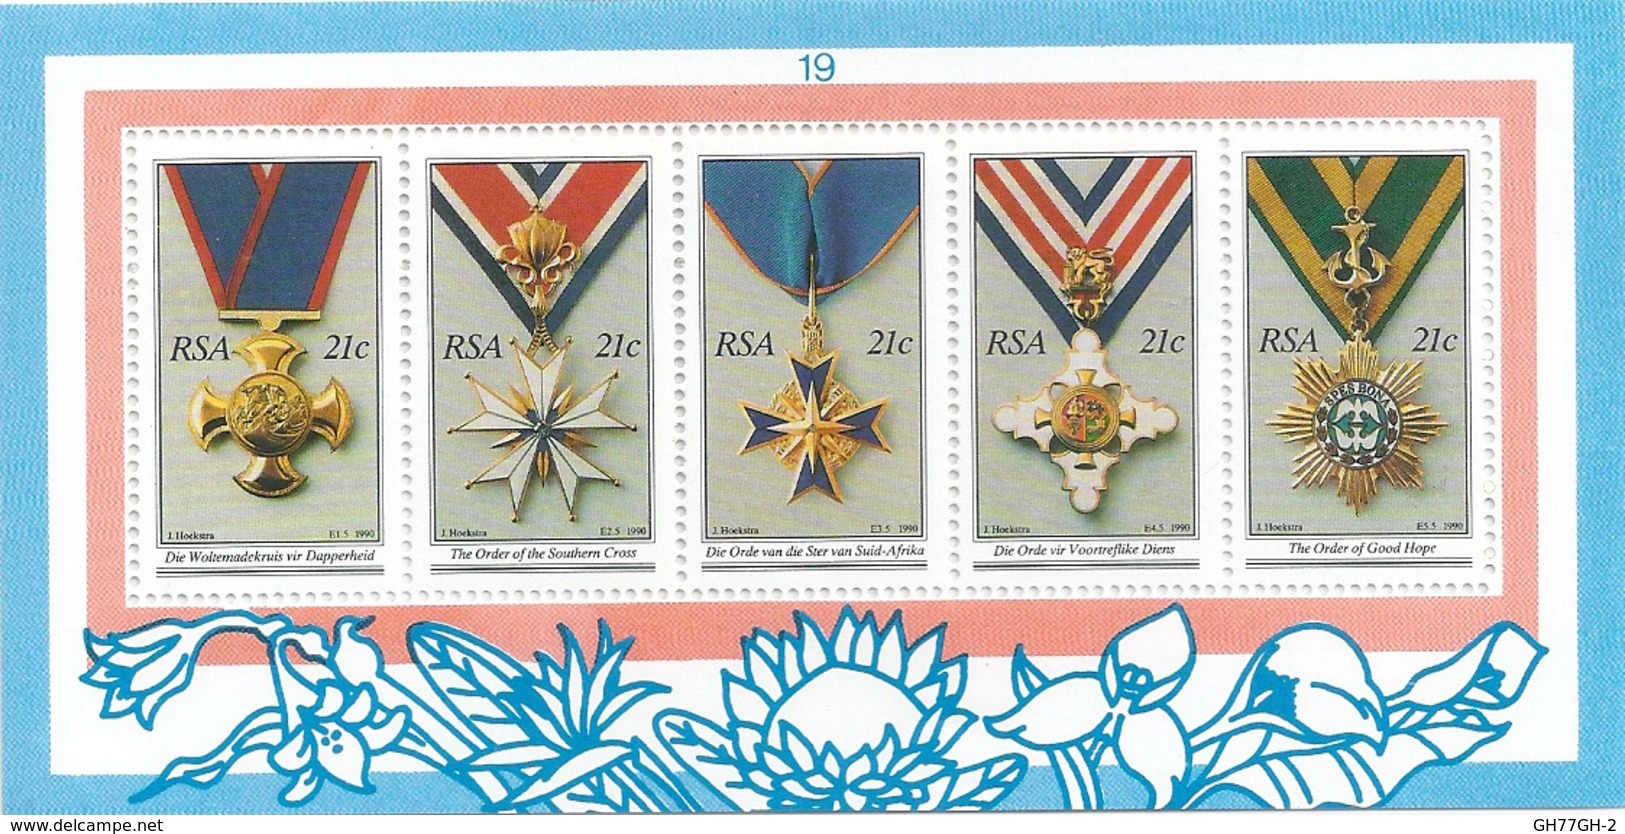 5 STAMPS REPUBLIC OF SOUTH AFRICA NATIONAL ORDERS 1990 -RSA 21C- - Ungebraucht